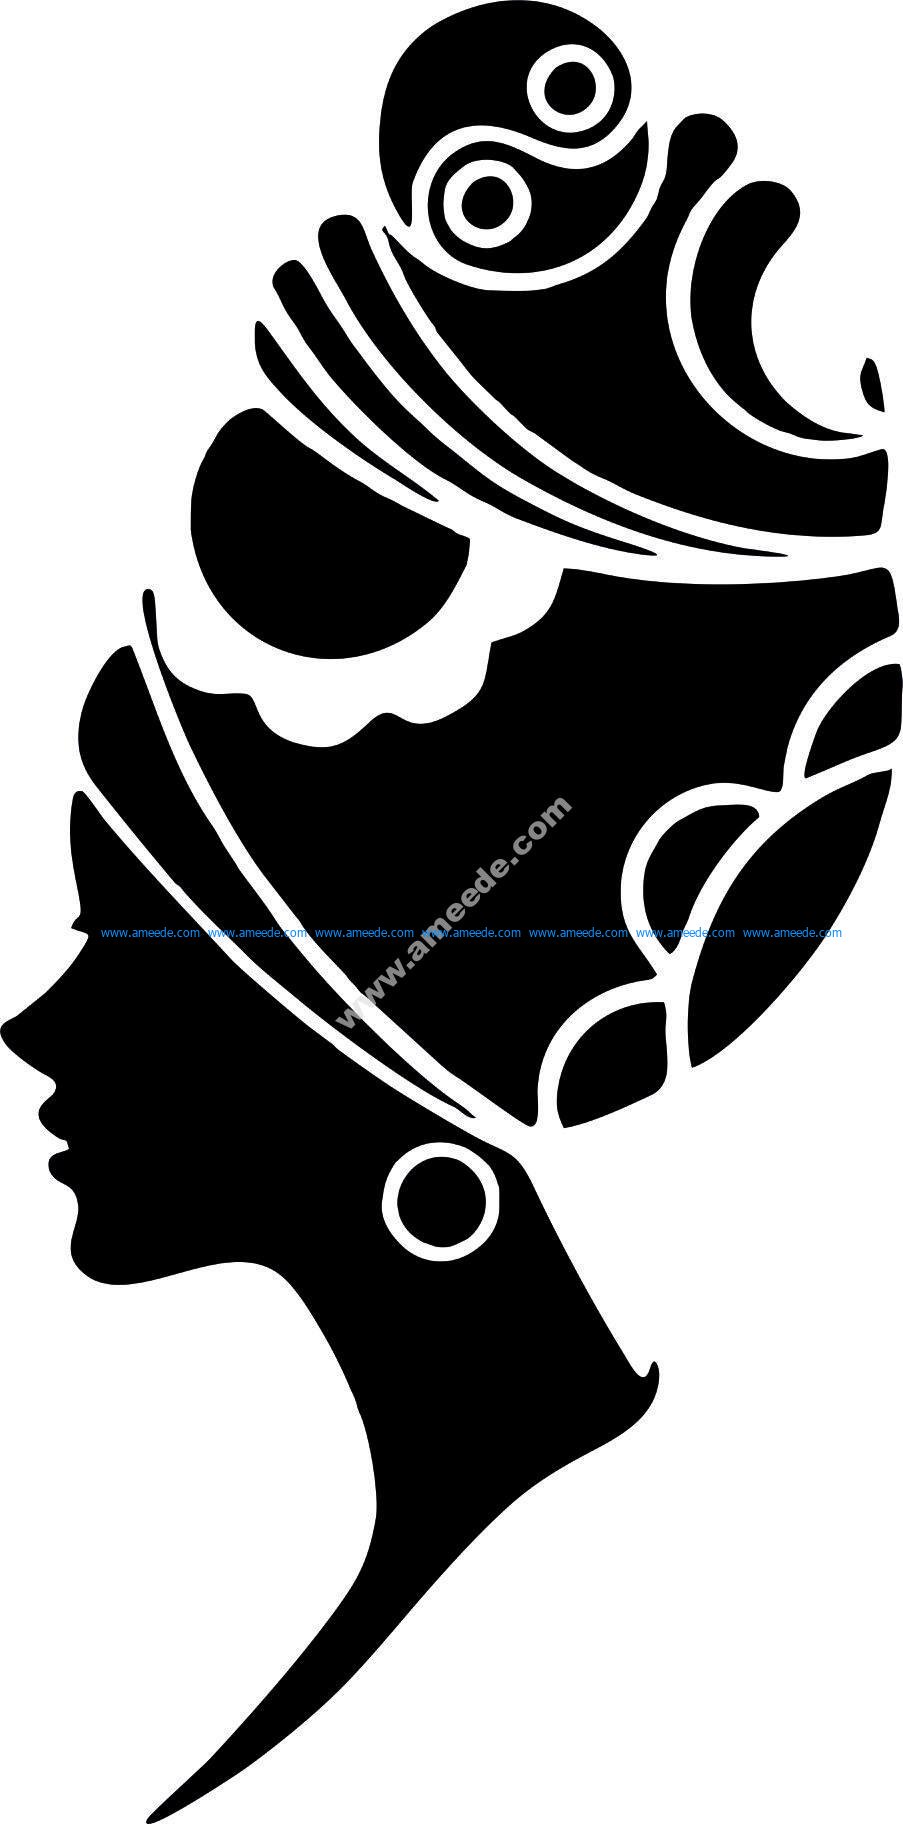 Download Woman Face Silhouette Vector Art jpg Image - Download Free ...